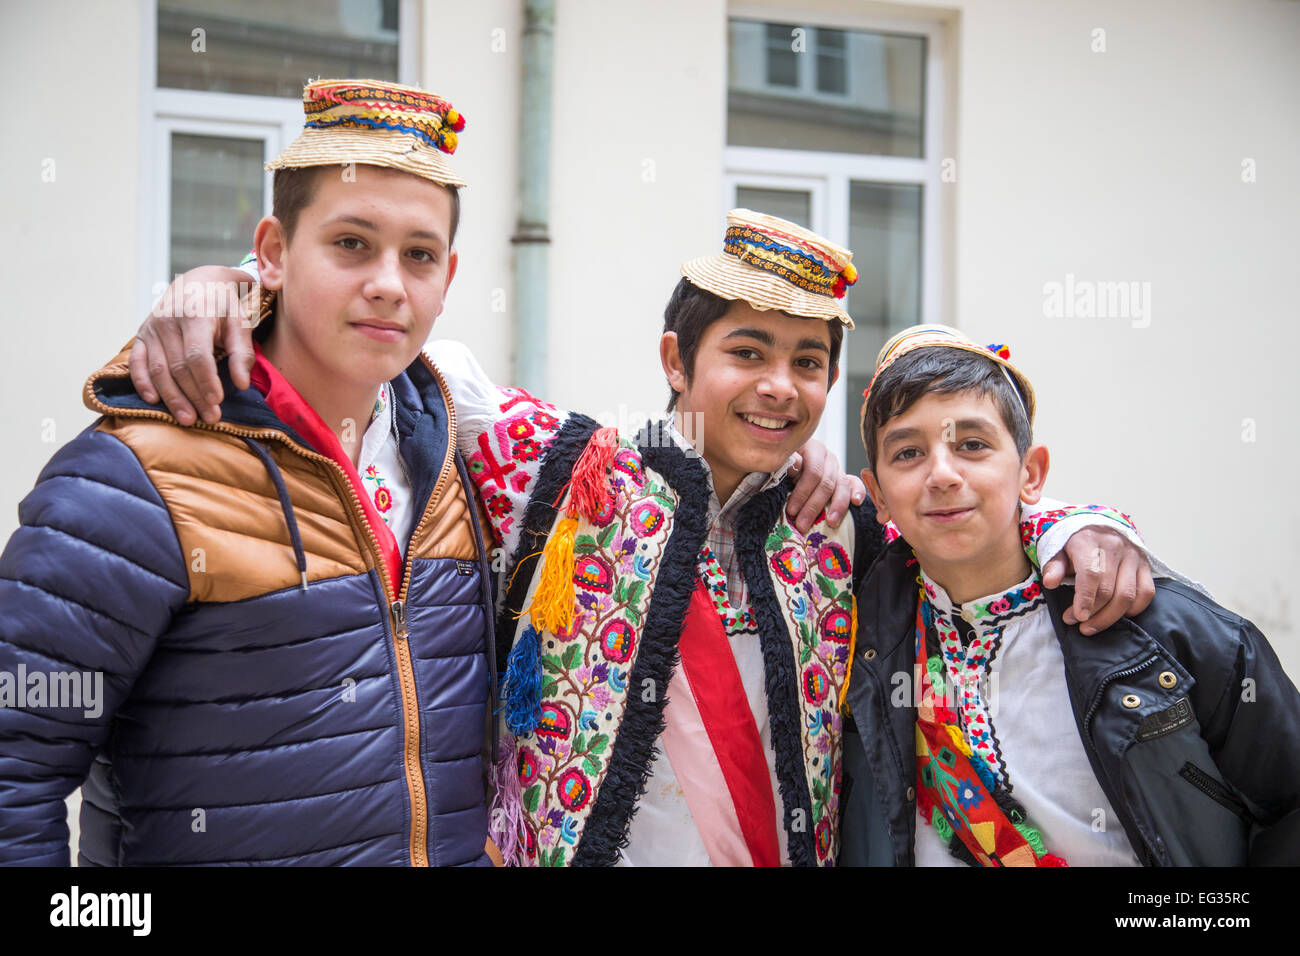 Romanian traditional costume in Sigisoara Transylvania with local people wearing felt and straw hats celebrating a Saints day Stock Photo